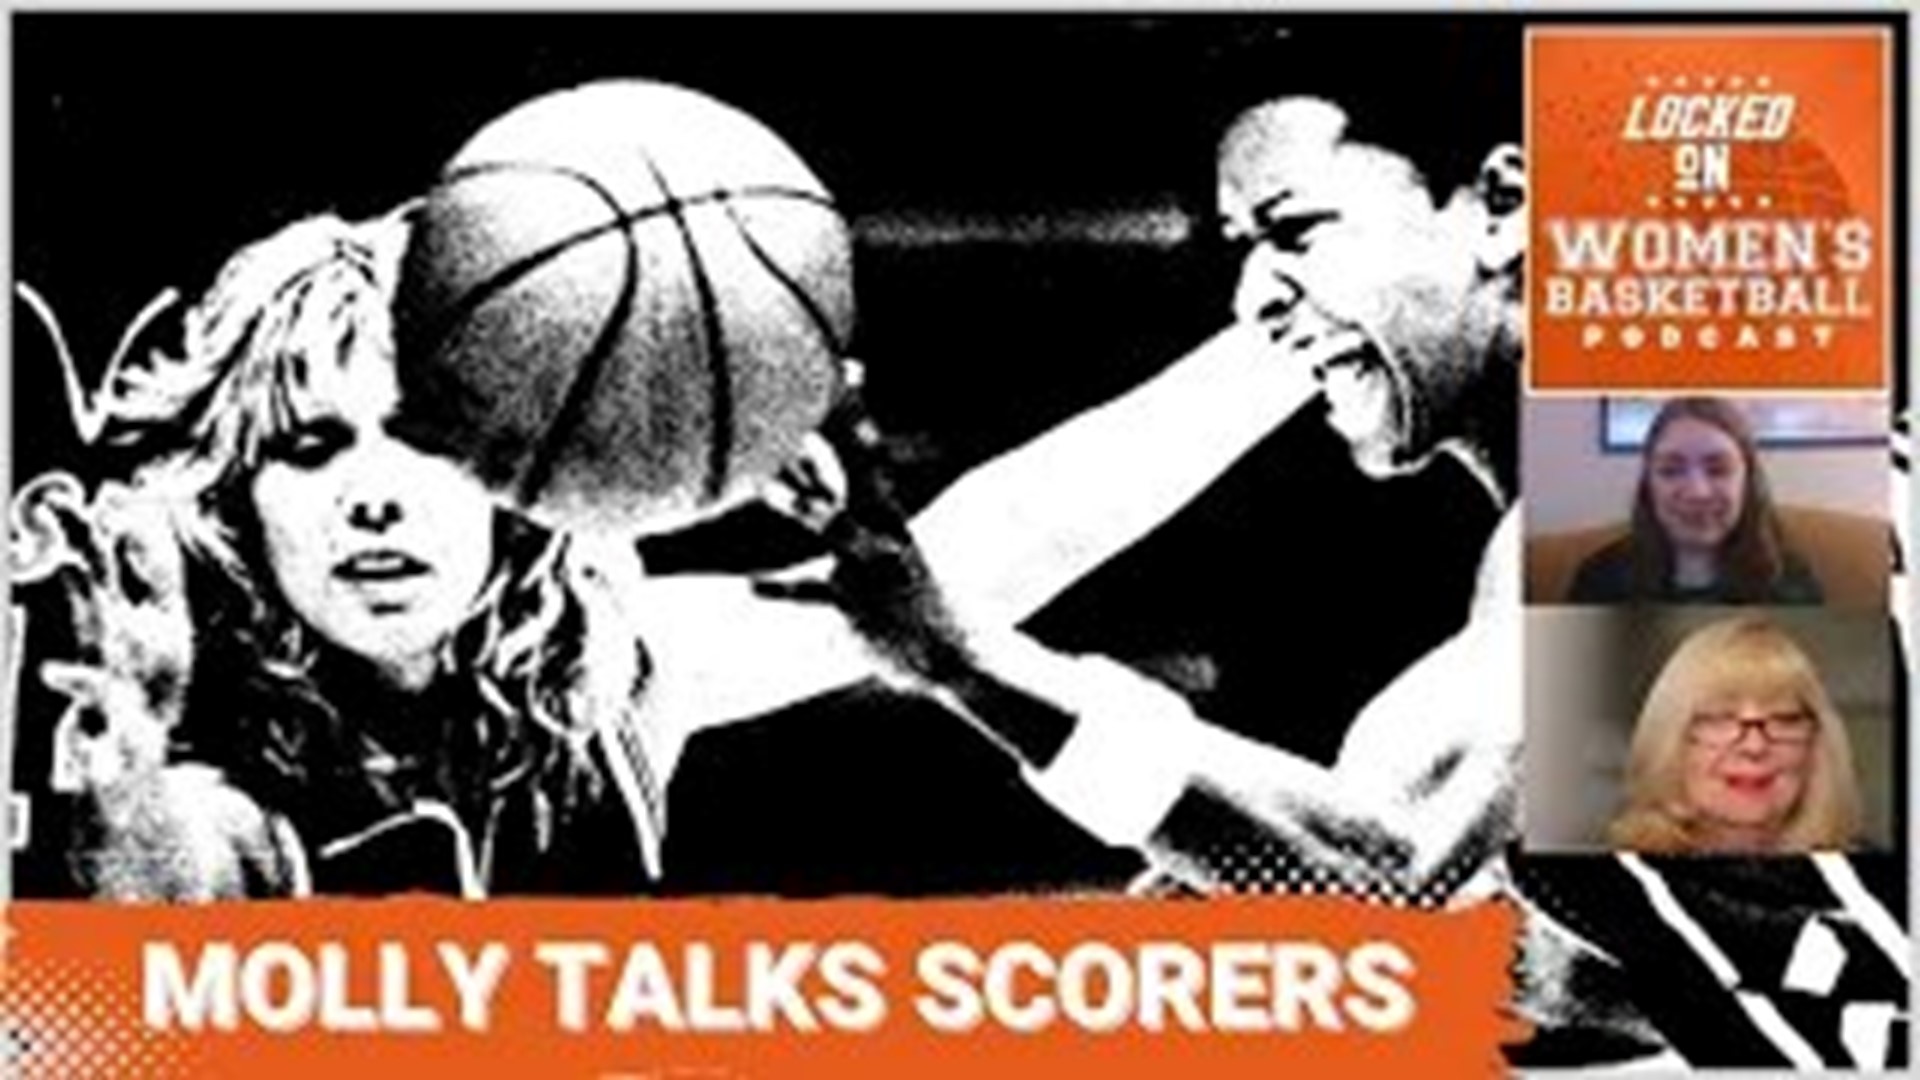 The legendary Molly (Bolin) Kazmer joins host Natalie Heavren to talk about some of the most prolific scorers in NCAA and AIAW history, including Caitlin Clark.